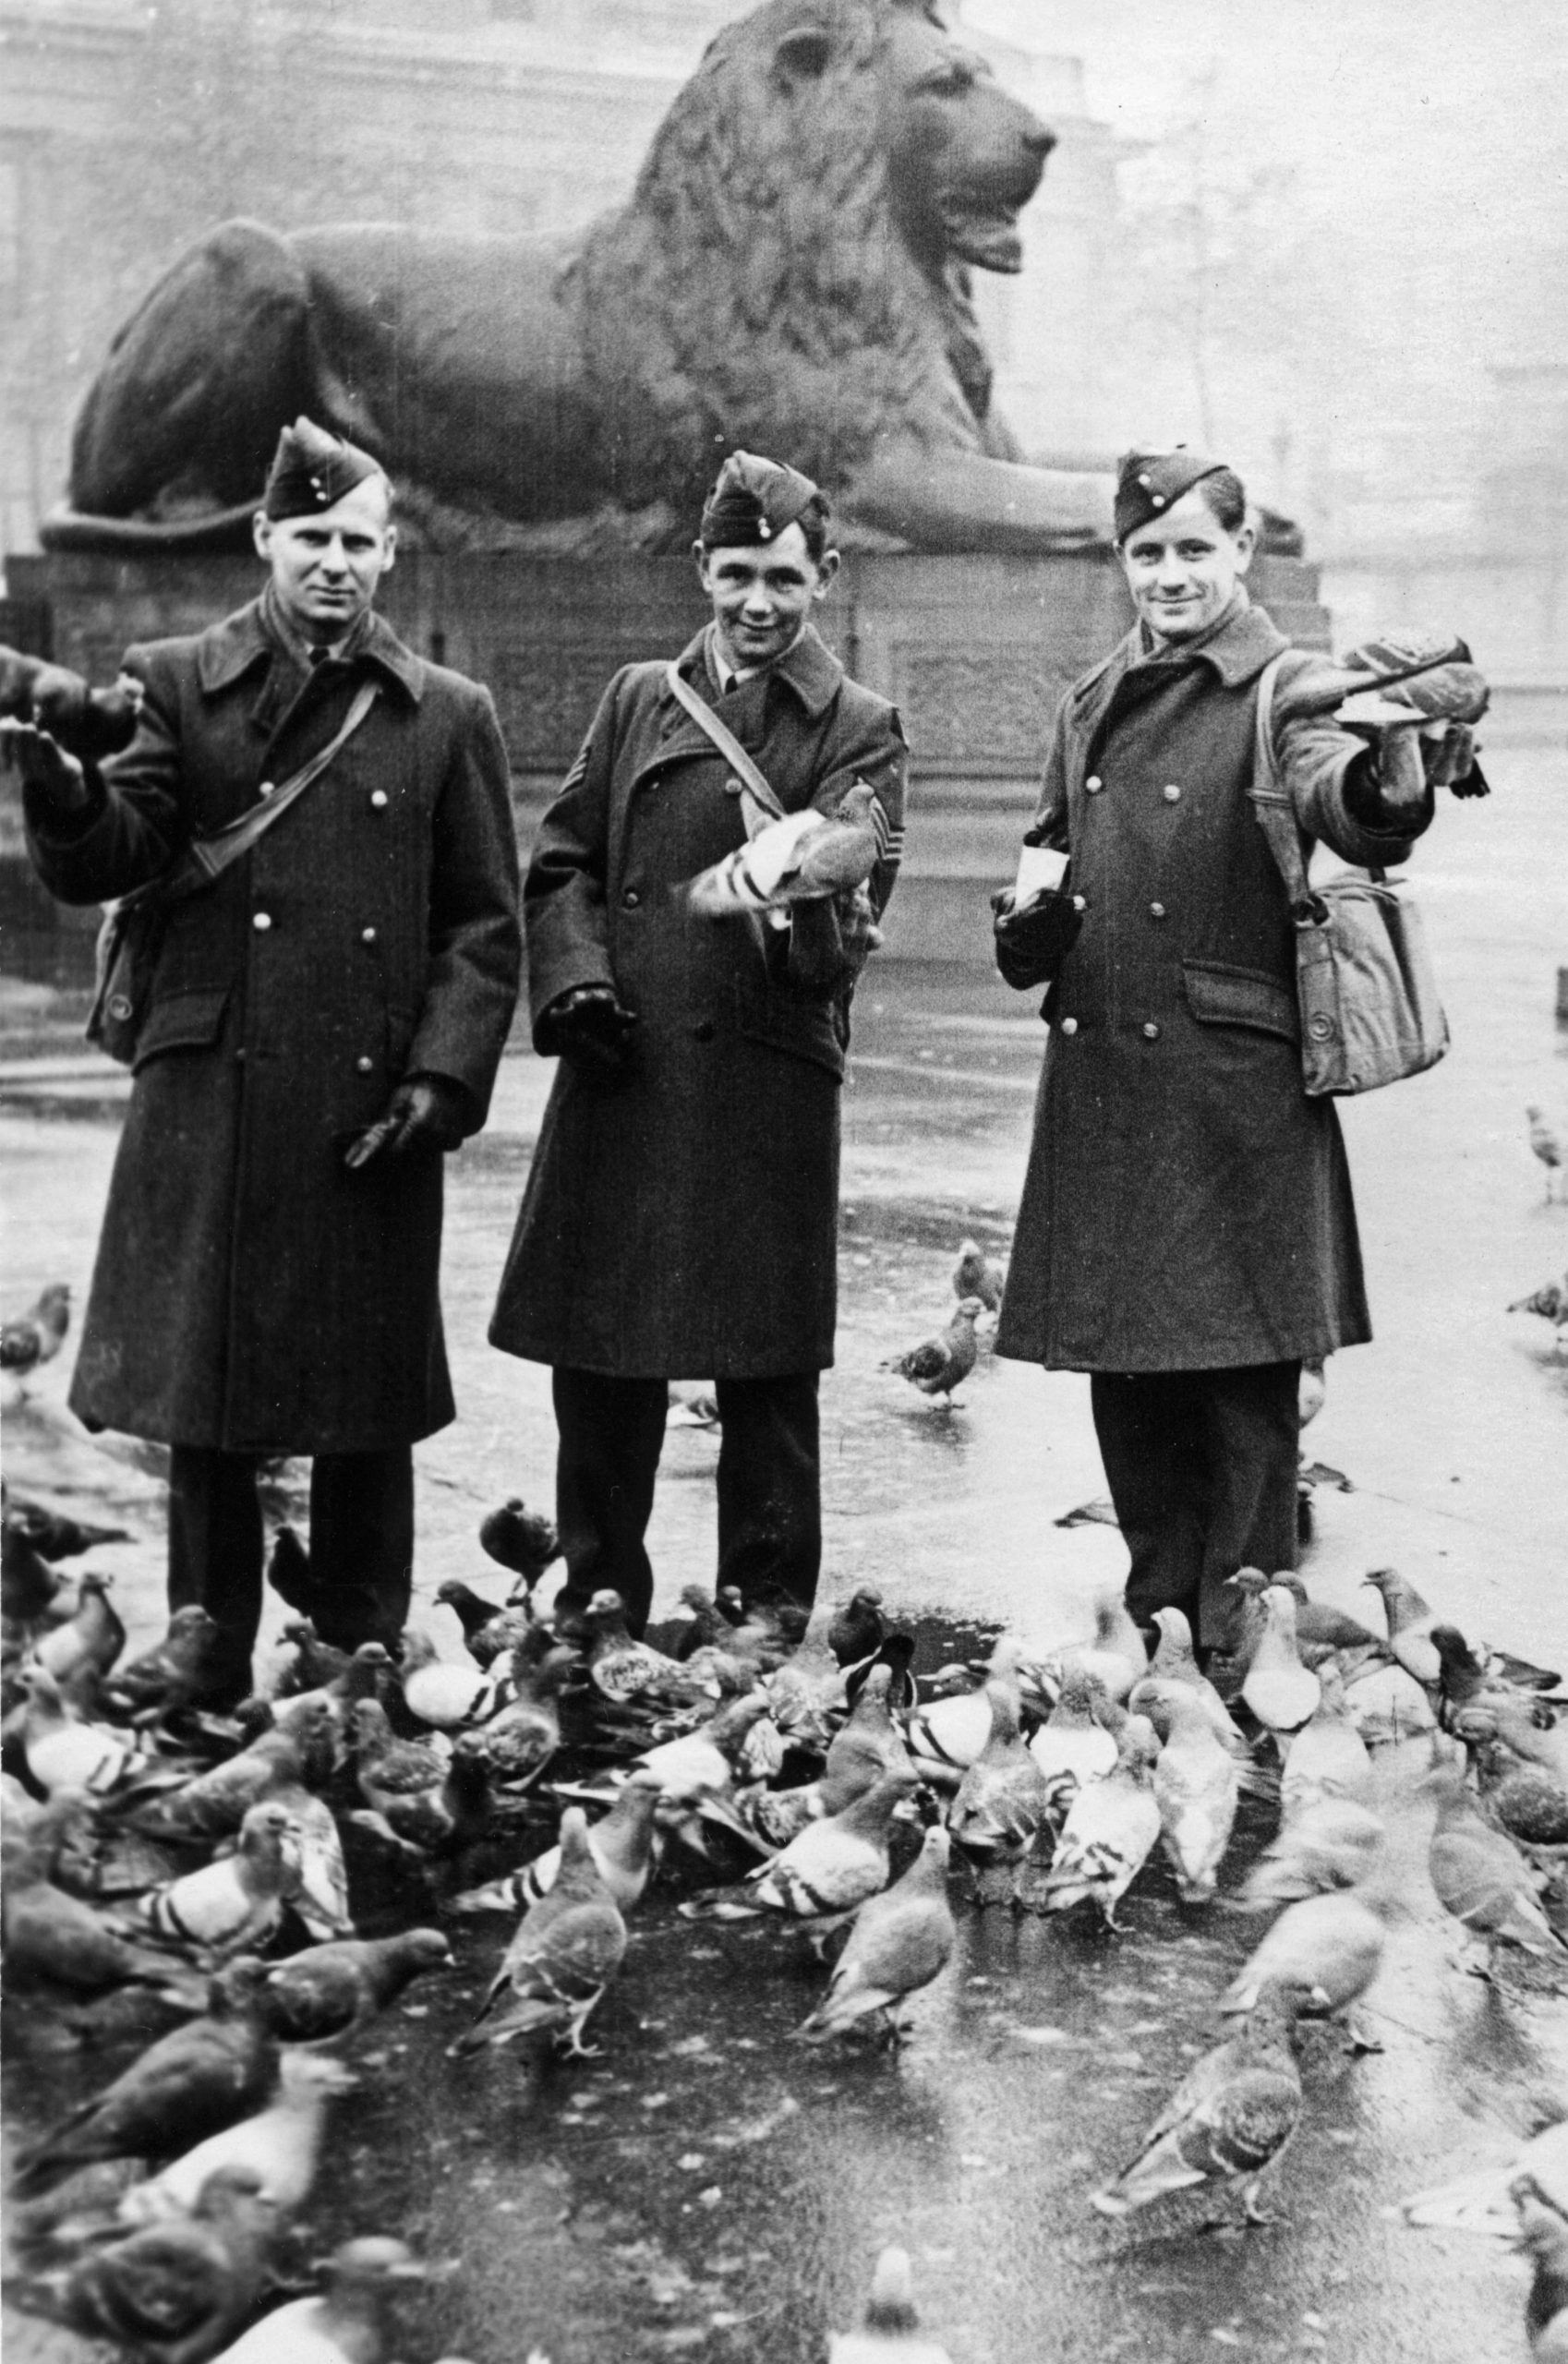 Warrant Officer Jack Maxwell Shaw and fellow airmen wearing greatcoats and holding pigeons in Trafalgar Square.